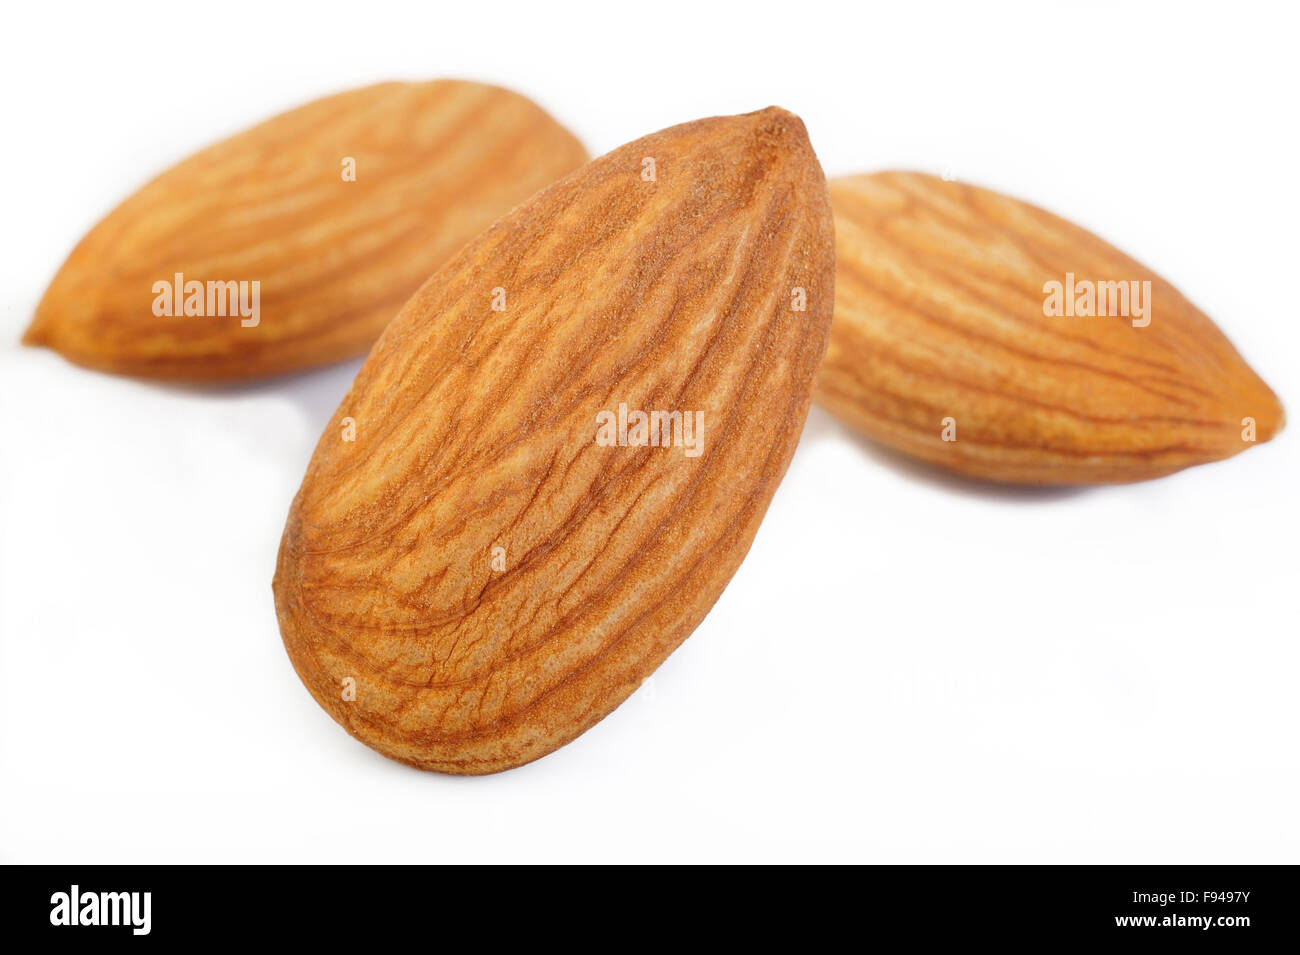 raw almond nuts isolated on white background Stock Photo